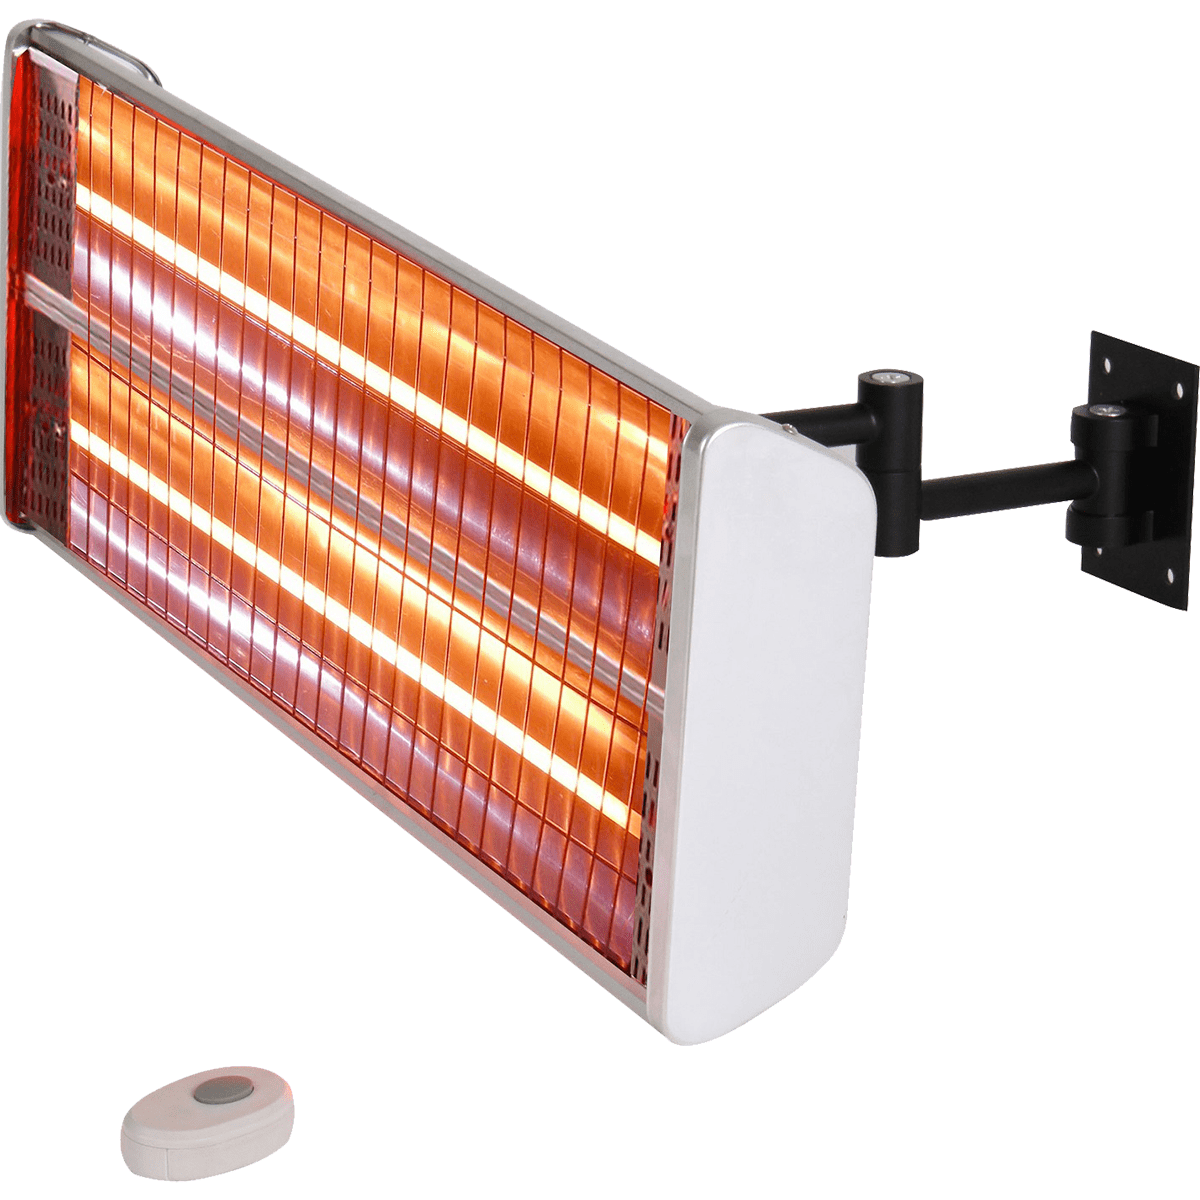 Ener-G+ 110V Wall Mounted Infrared Outdoor Heater